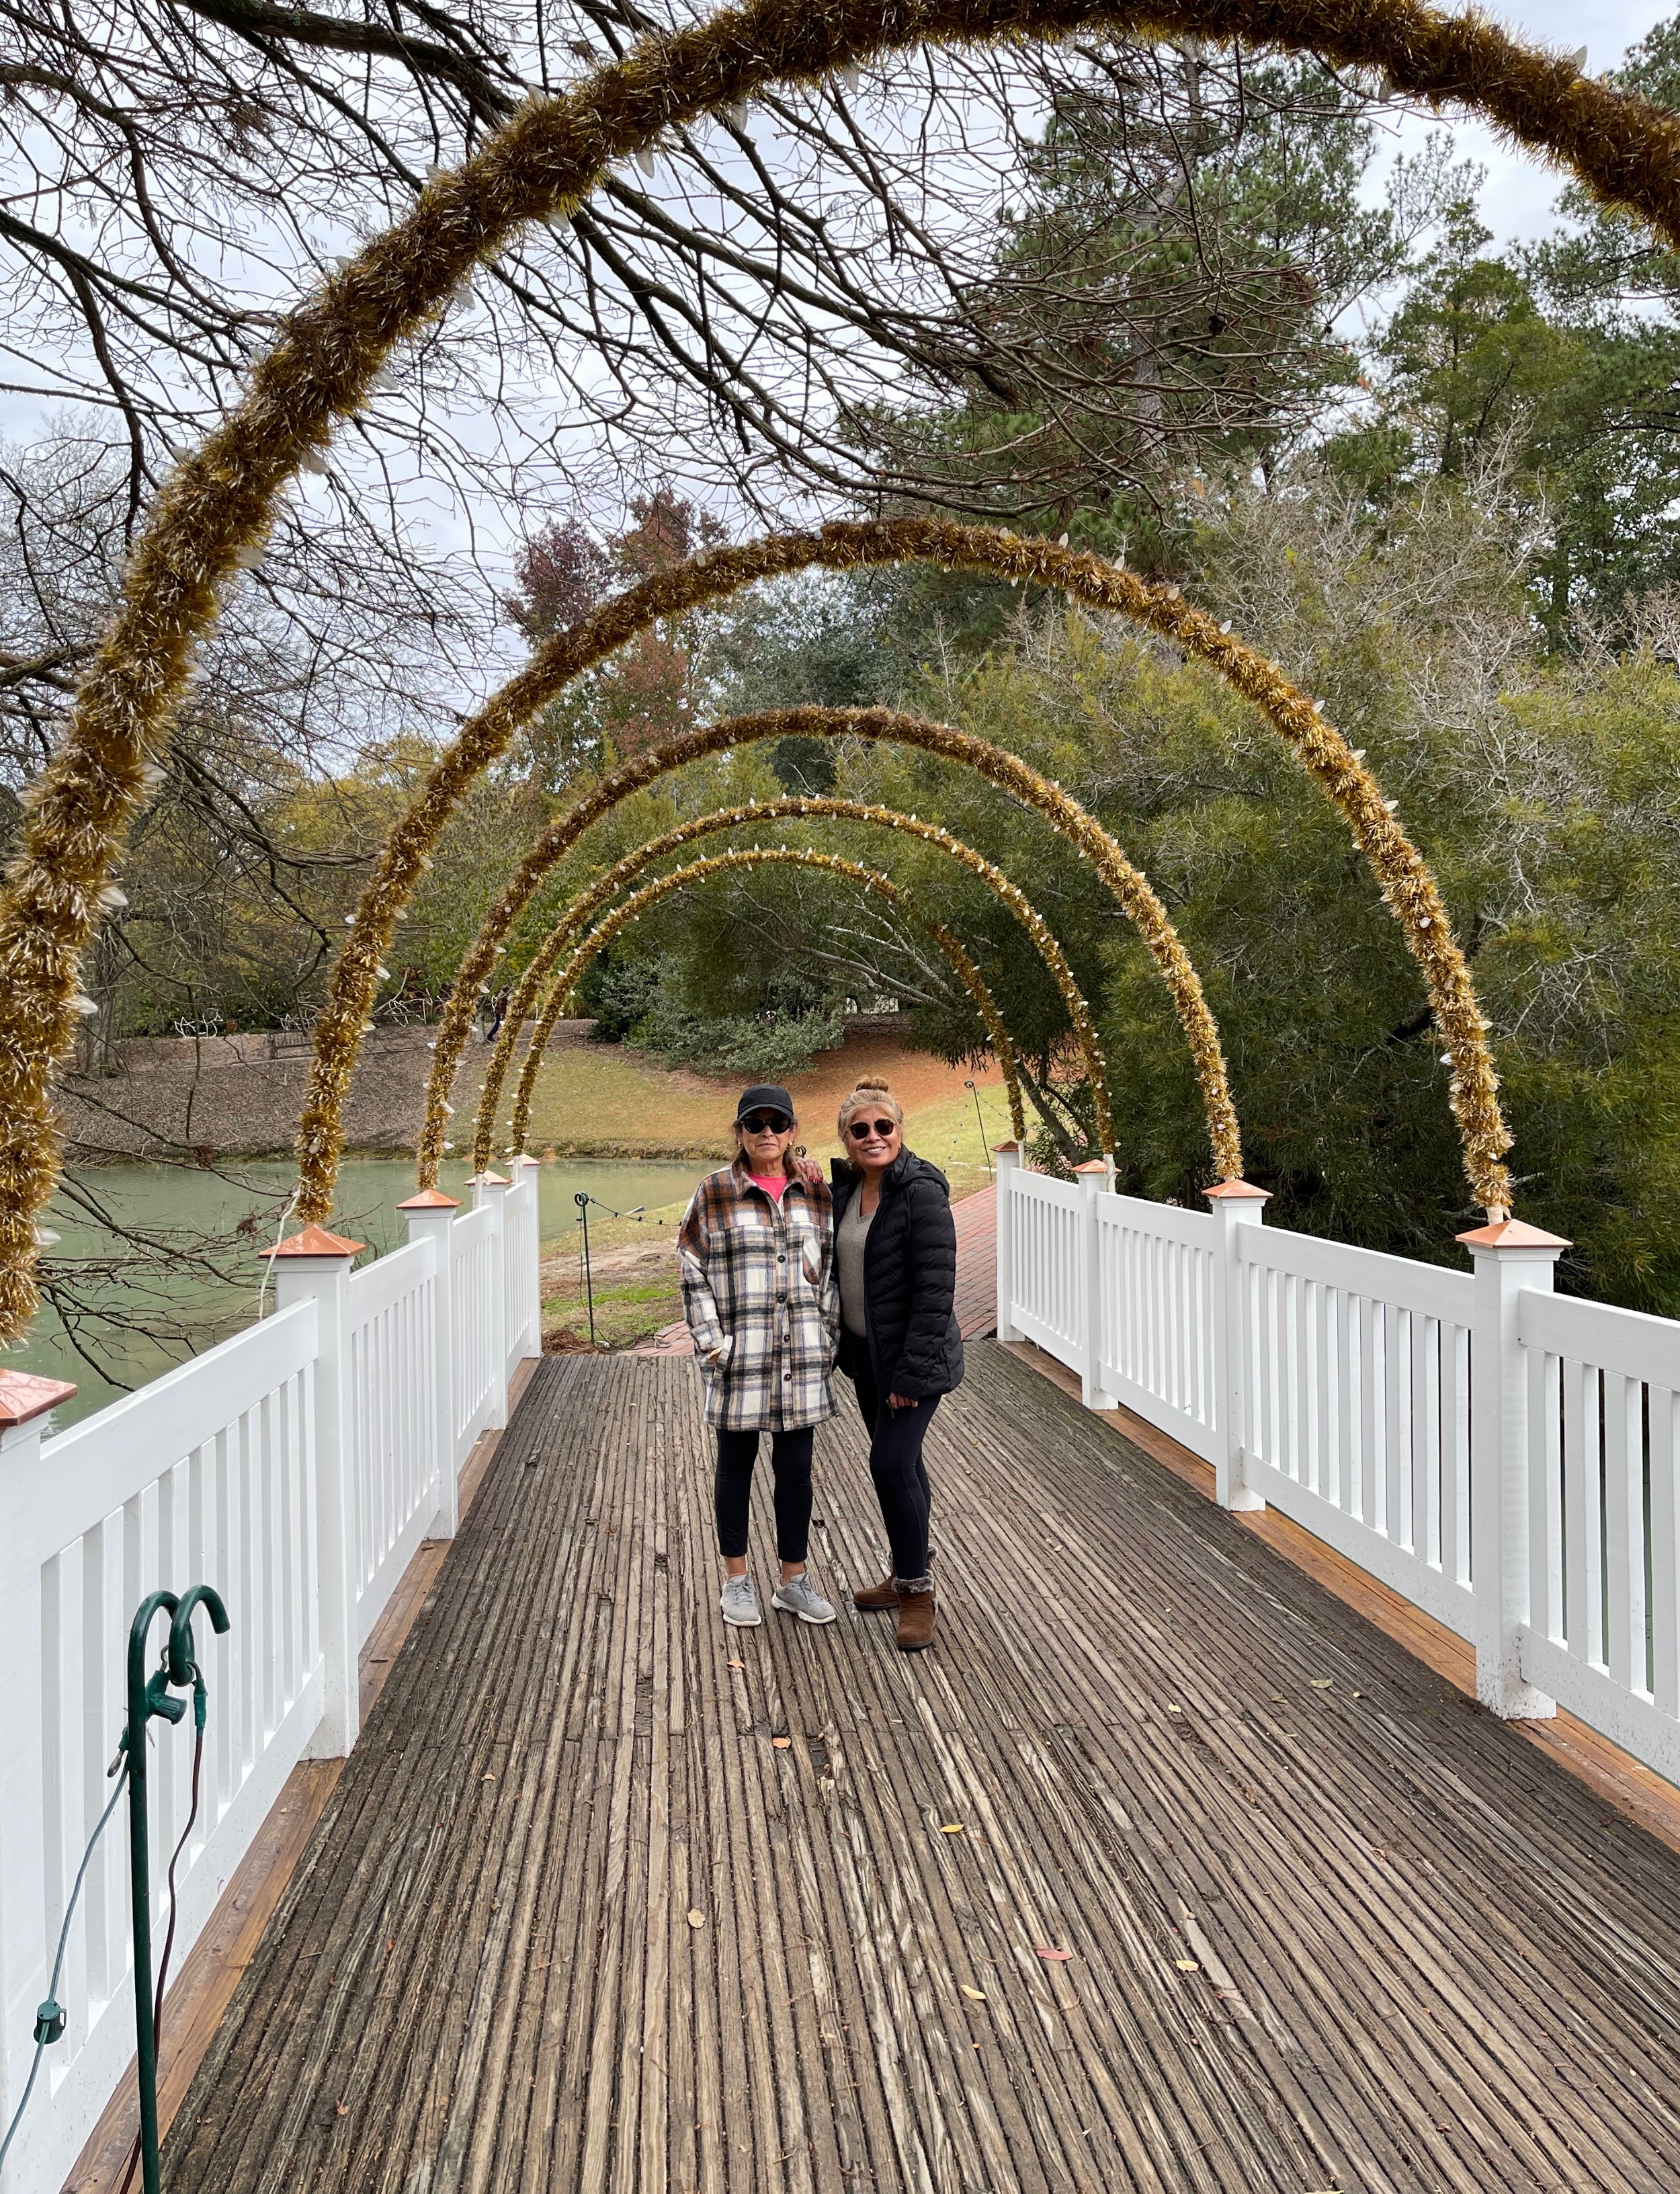 Wow, We’ve Been On This Bridge For A While. Let’s Go Someplace Else, PLEASE!!! 👩👰‍♂️💐😘❤️🏞️🌥️☦️🇺🇸  Aiken, S.C. 2022